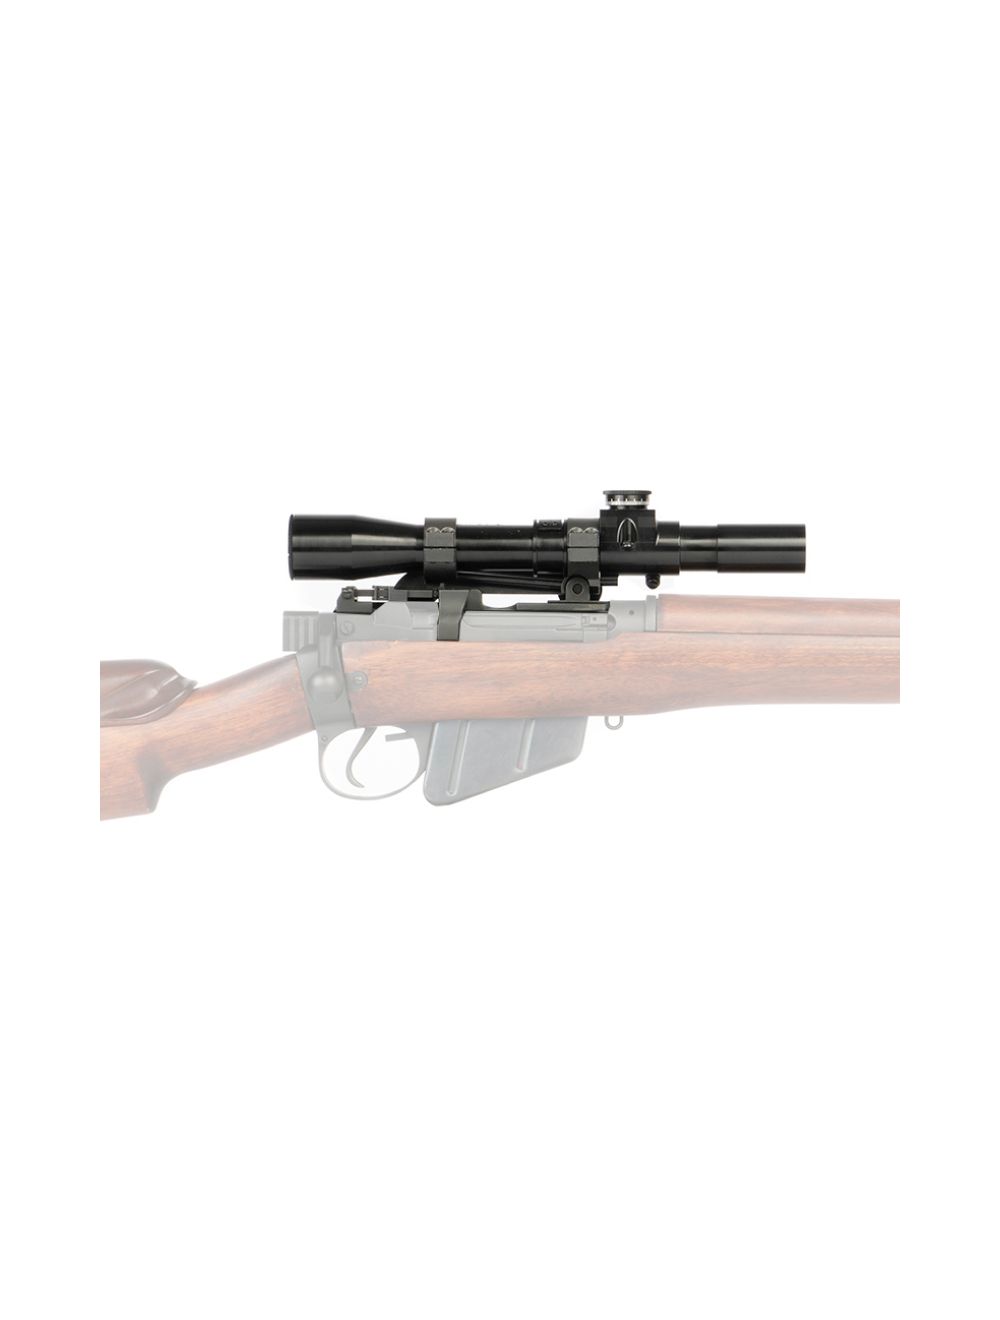 S&T Lee Enfield Mk III Bolt Action Rifle Springer (Real, 53% OFF